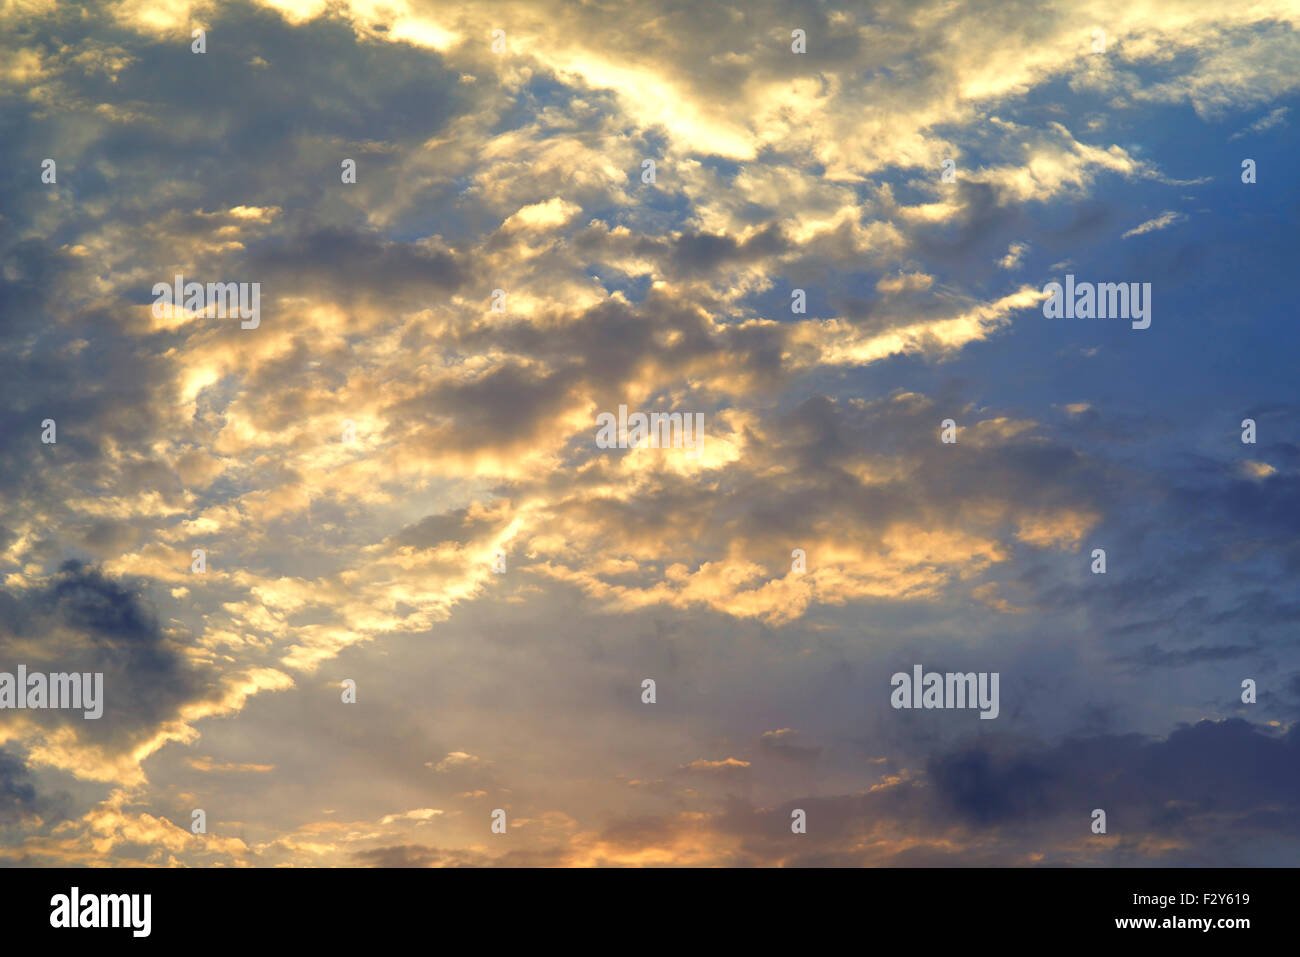 Dramatic Sunlight with Vivid Clouds in Sky. Stock Photo